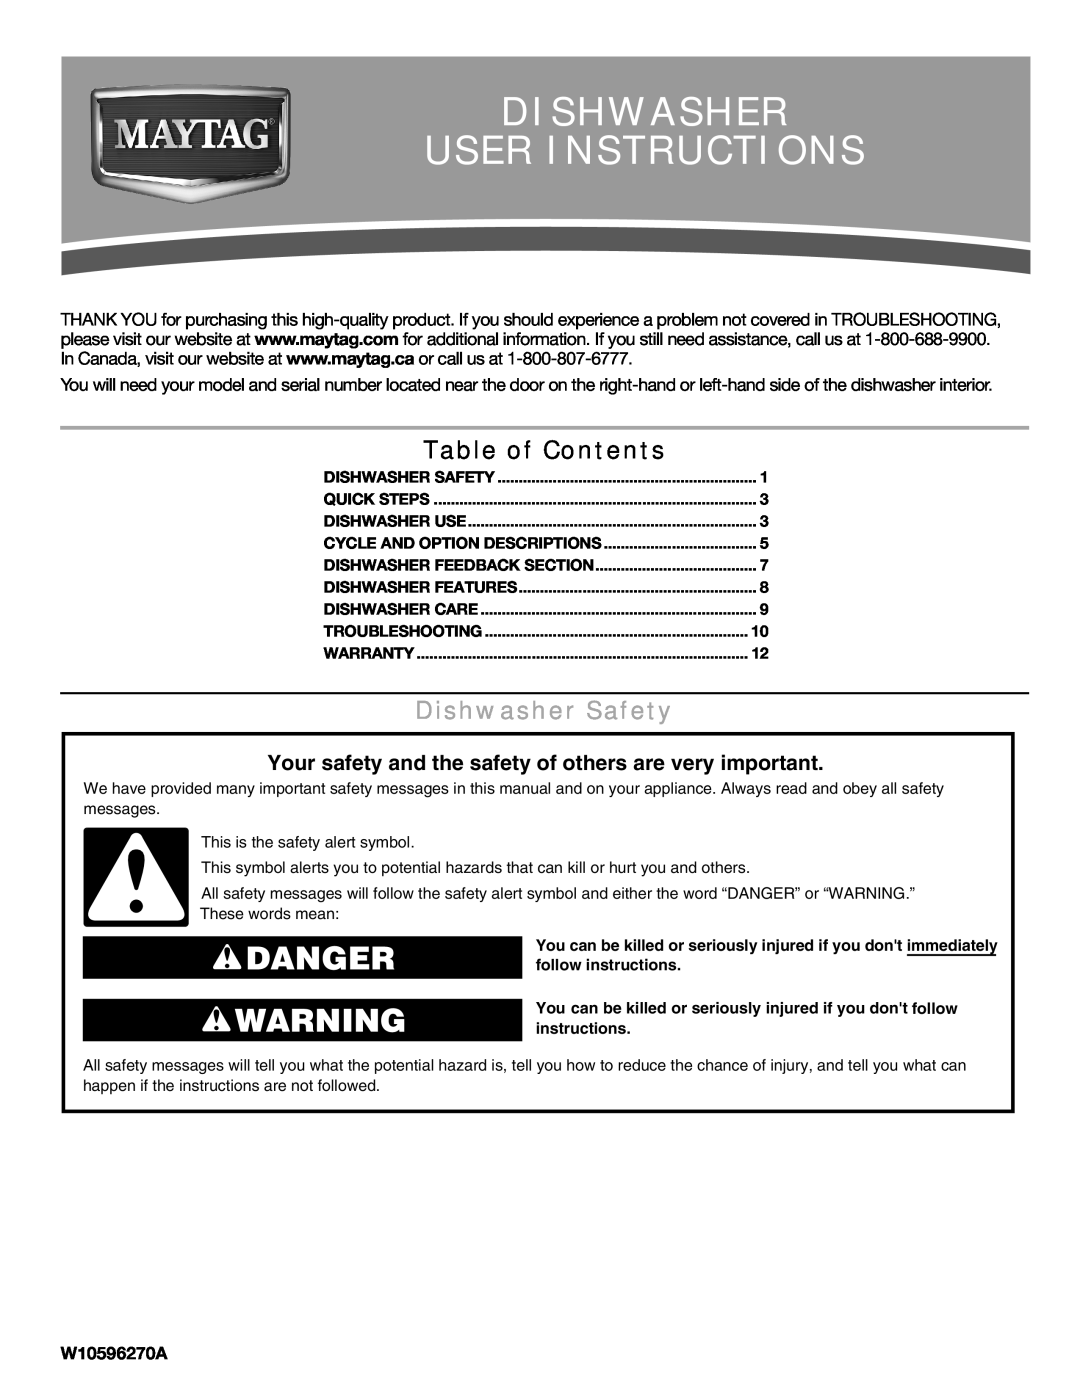 Maytag MDB6600WH warranty Dishwasher User Instructions, Danger, Table of Contents, Dishwasher Safety, W10596270A 